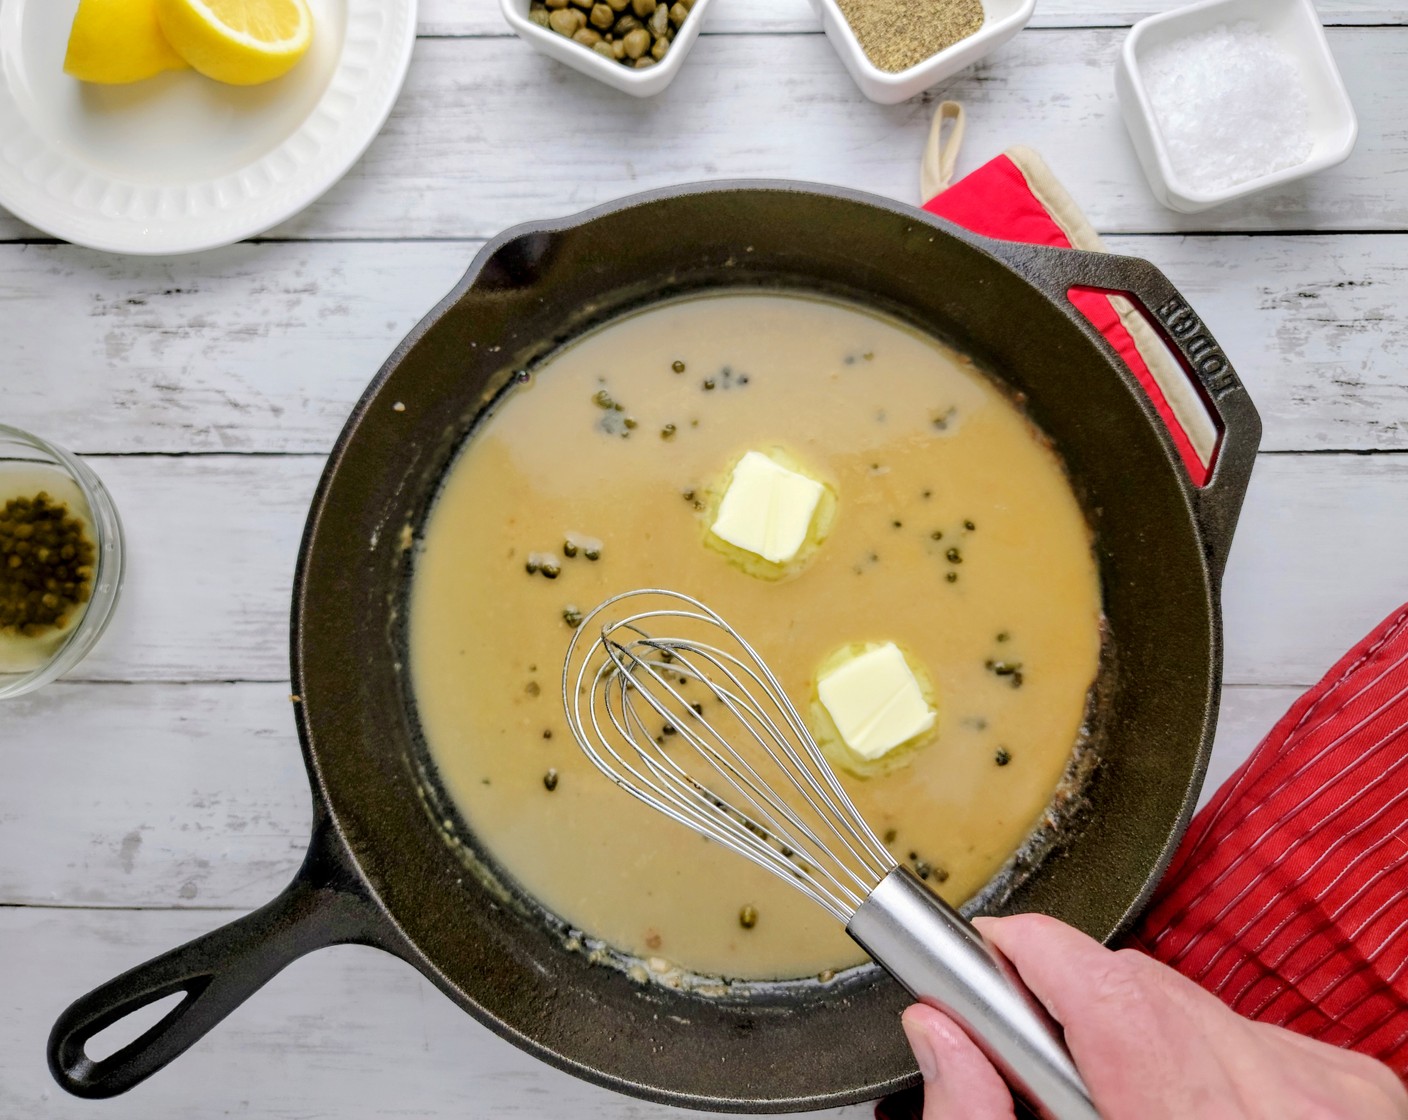 step 8 To the pan, add 1 Tbsp of Butter (1 Tbsp), McCormick® Garlic Powder (1 tsp), and All-Purpose Flour (1 Tbsp). Whisk the flour into the melted butter and cook for 2 minutes.